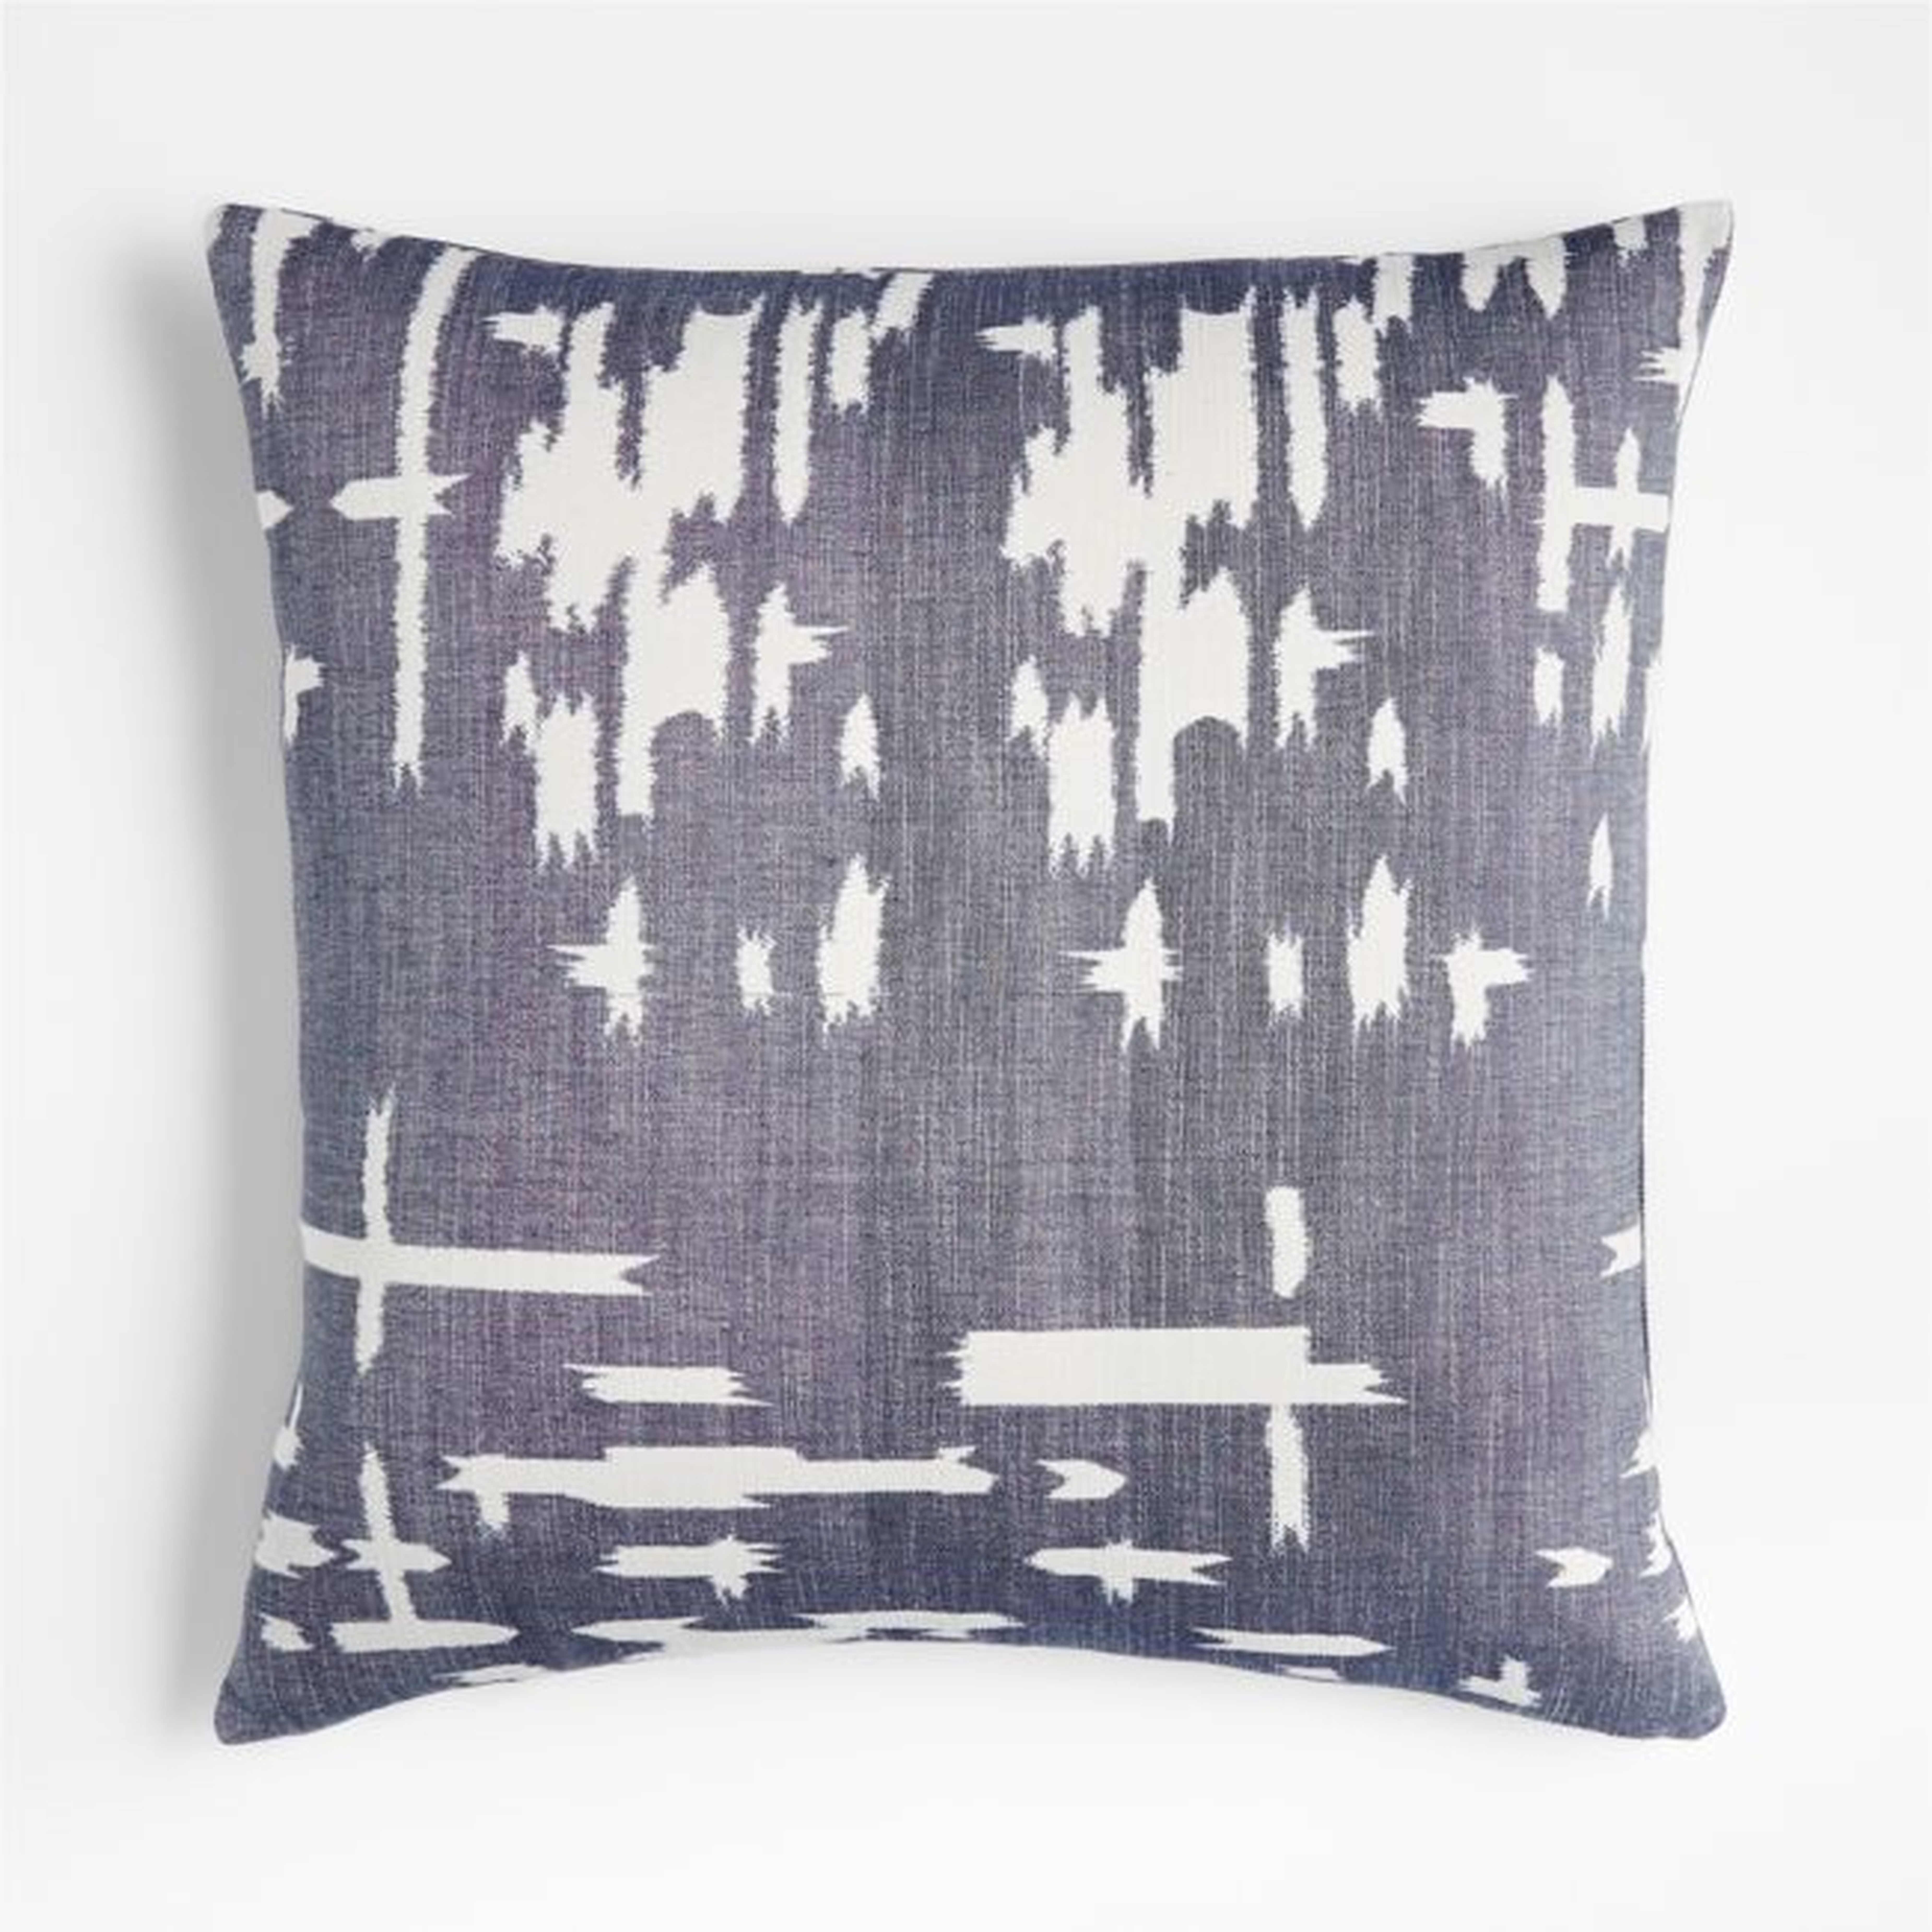 Taza Pillow Cover with Down-Alternative Insert, Ikat Blue, 23" x 23" - Crate and Barrel